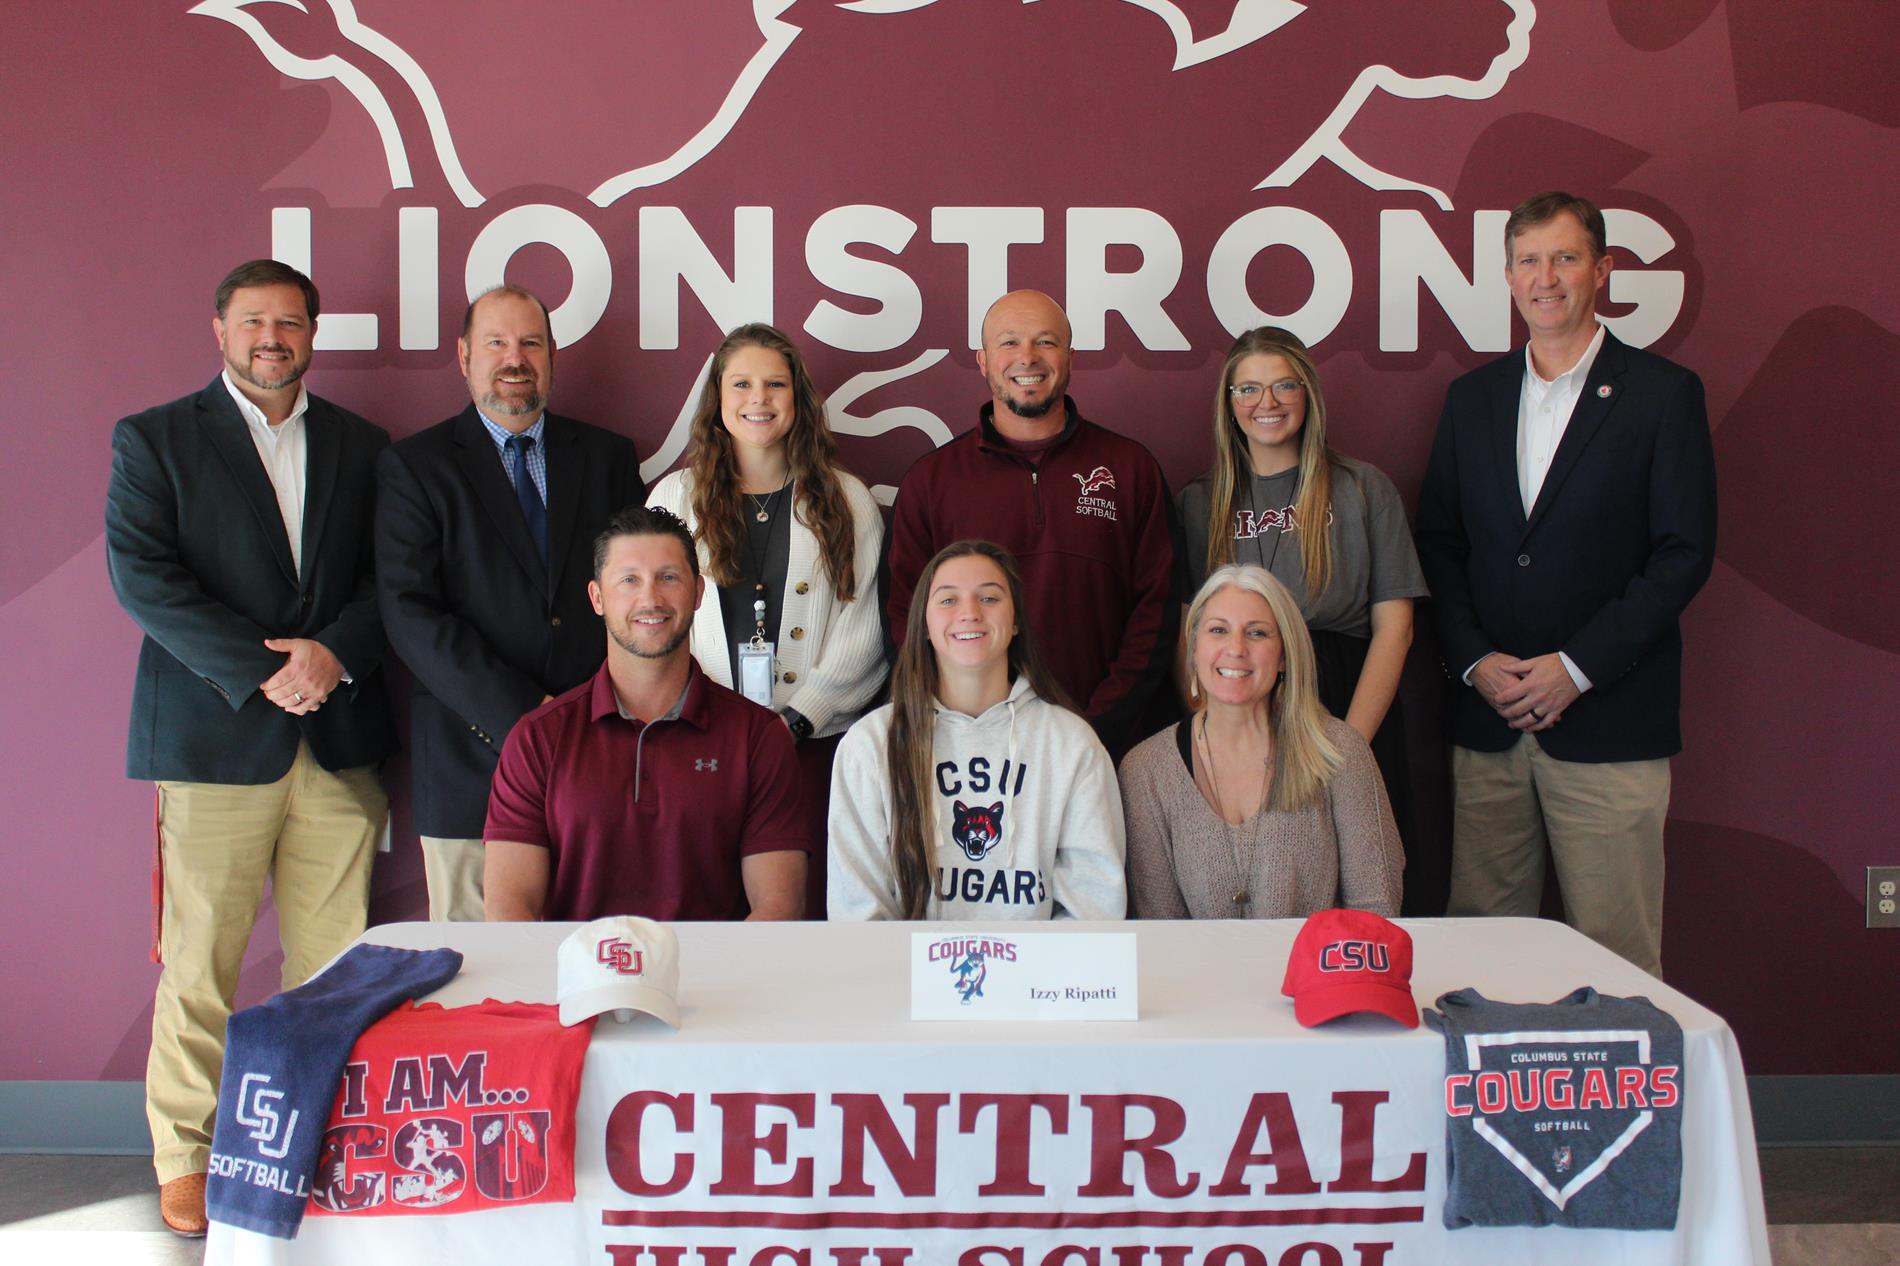 Central High School’s Izzy Ripatti to Play at Columbus State